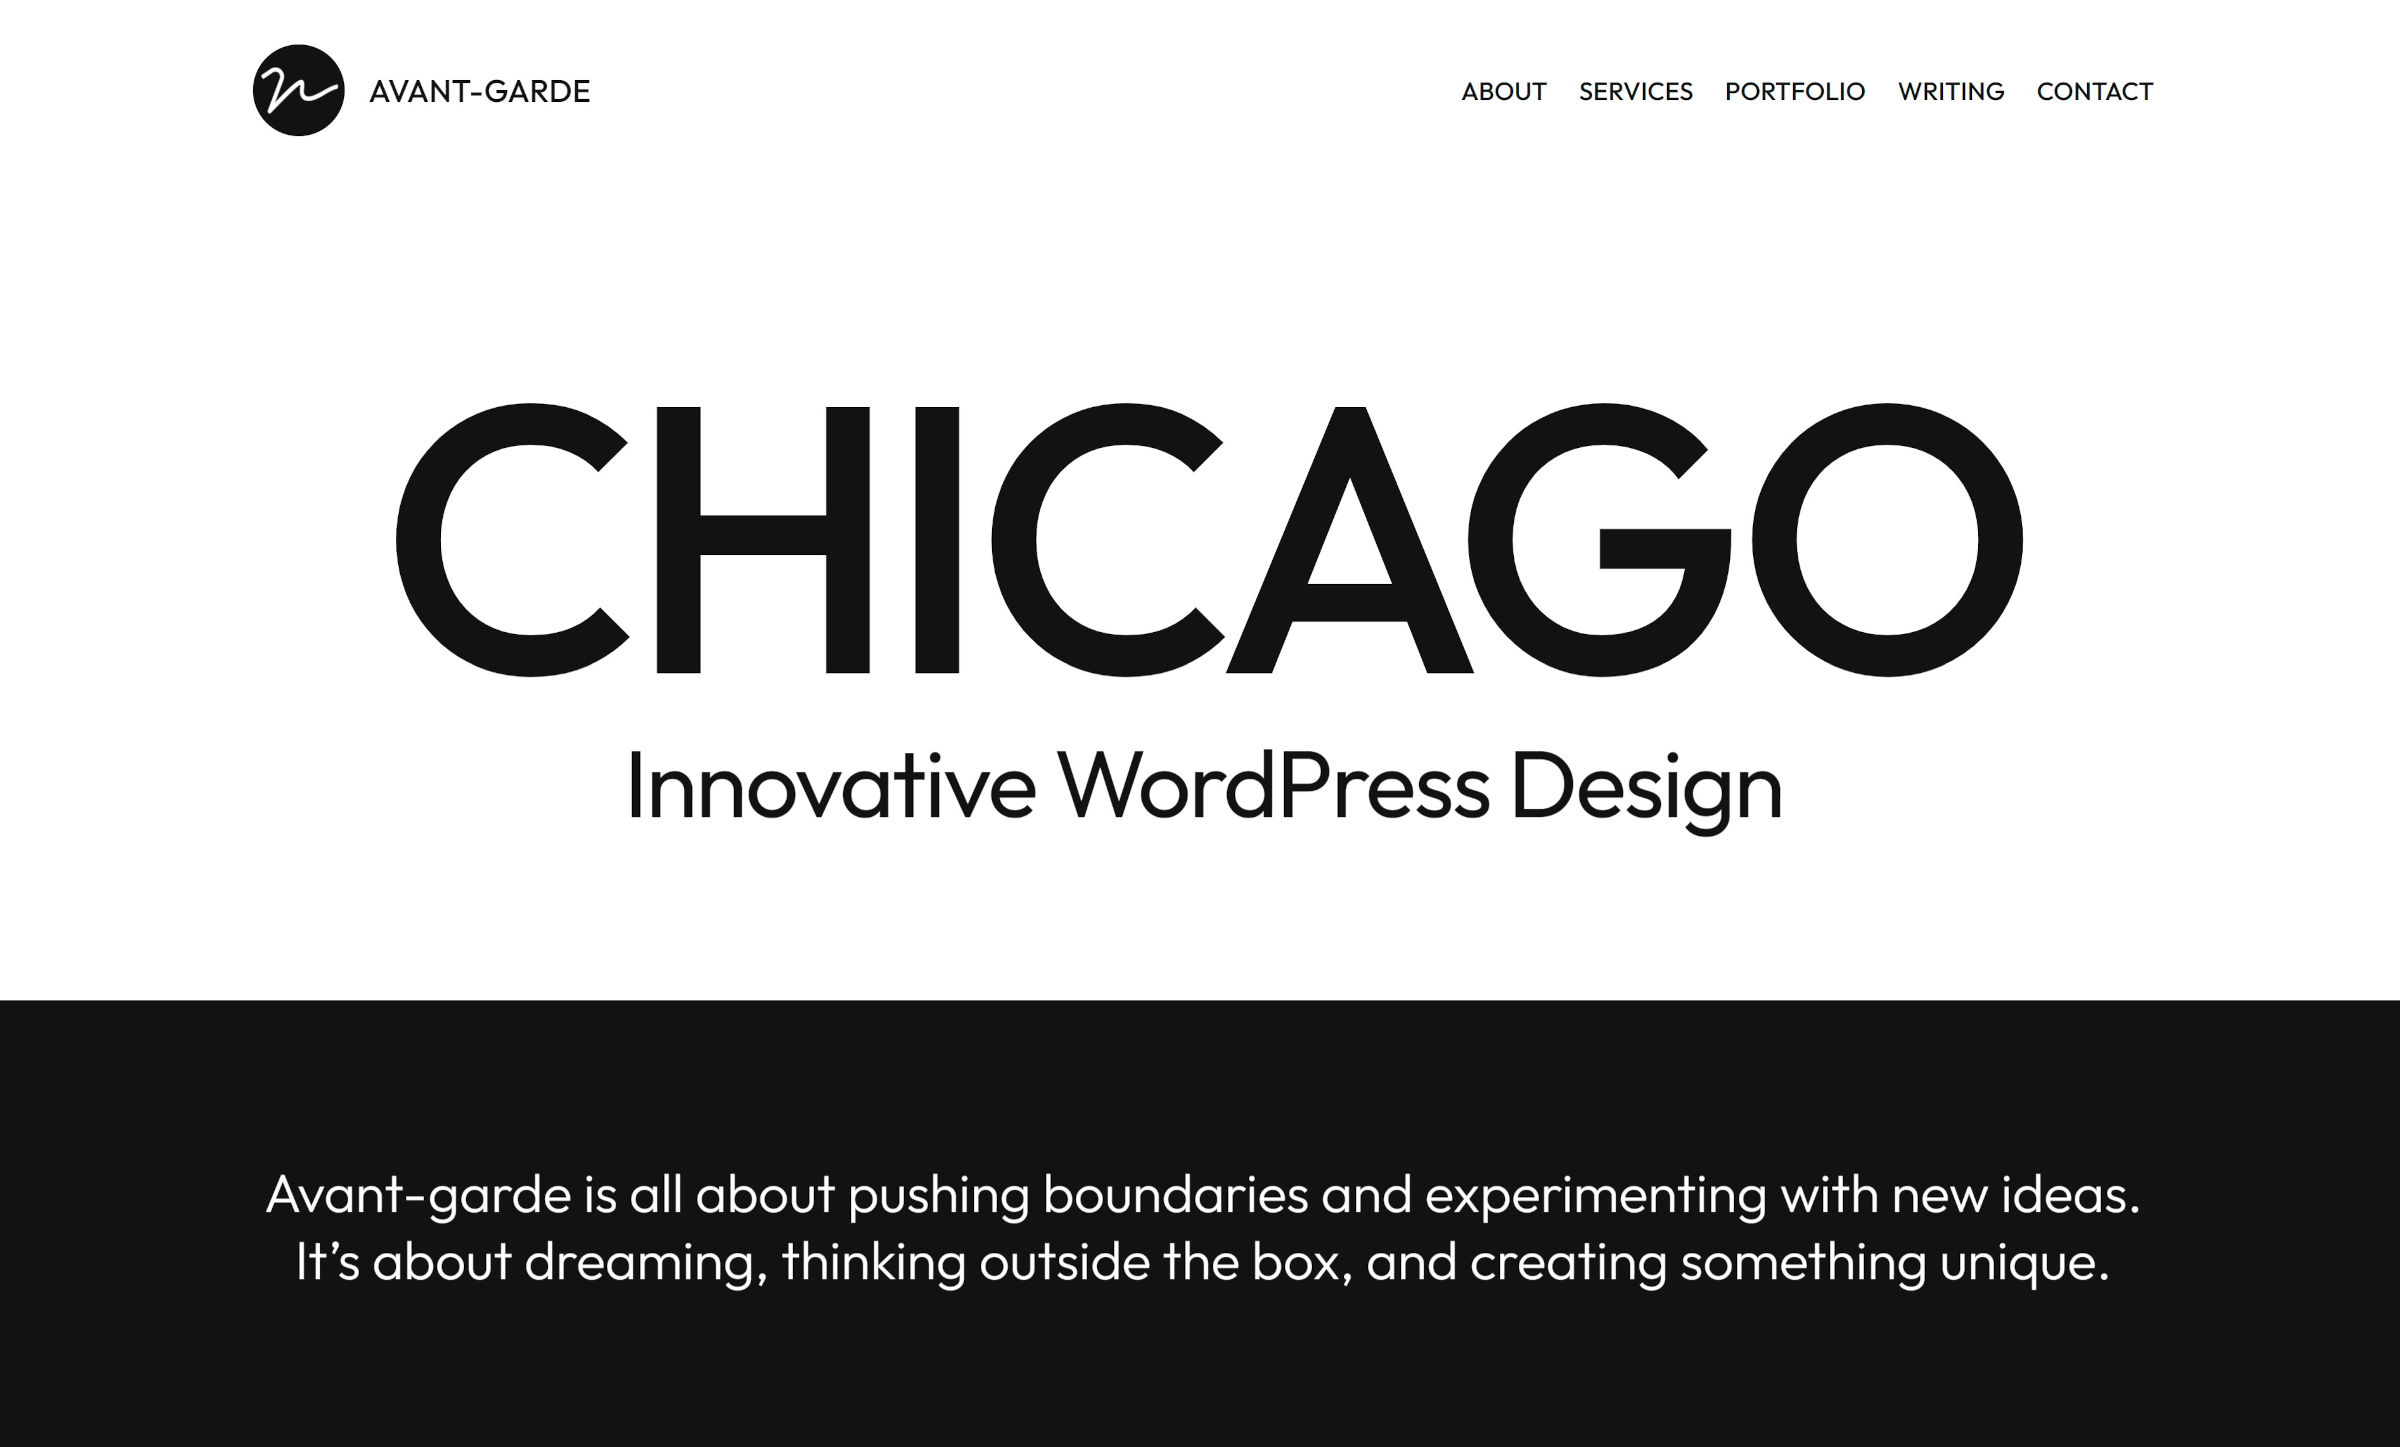 Homepage screenshot of WordPress theme with a logo, title, and menu in the header.  It has a large intro section with the words "Chicago, Innovative WordPress Design."